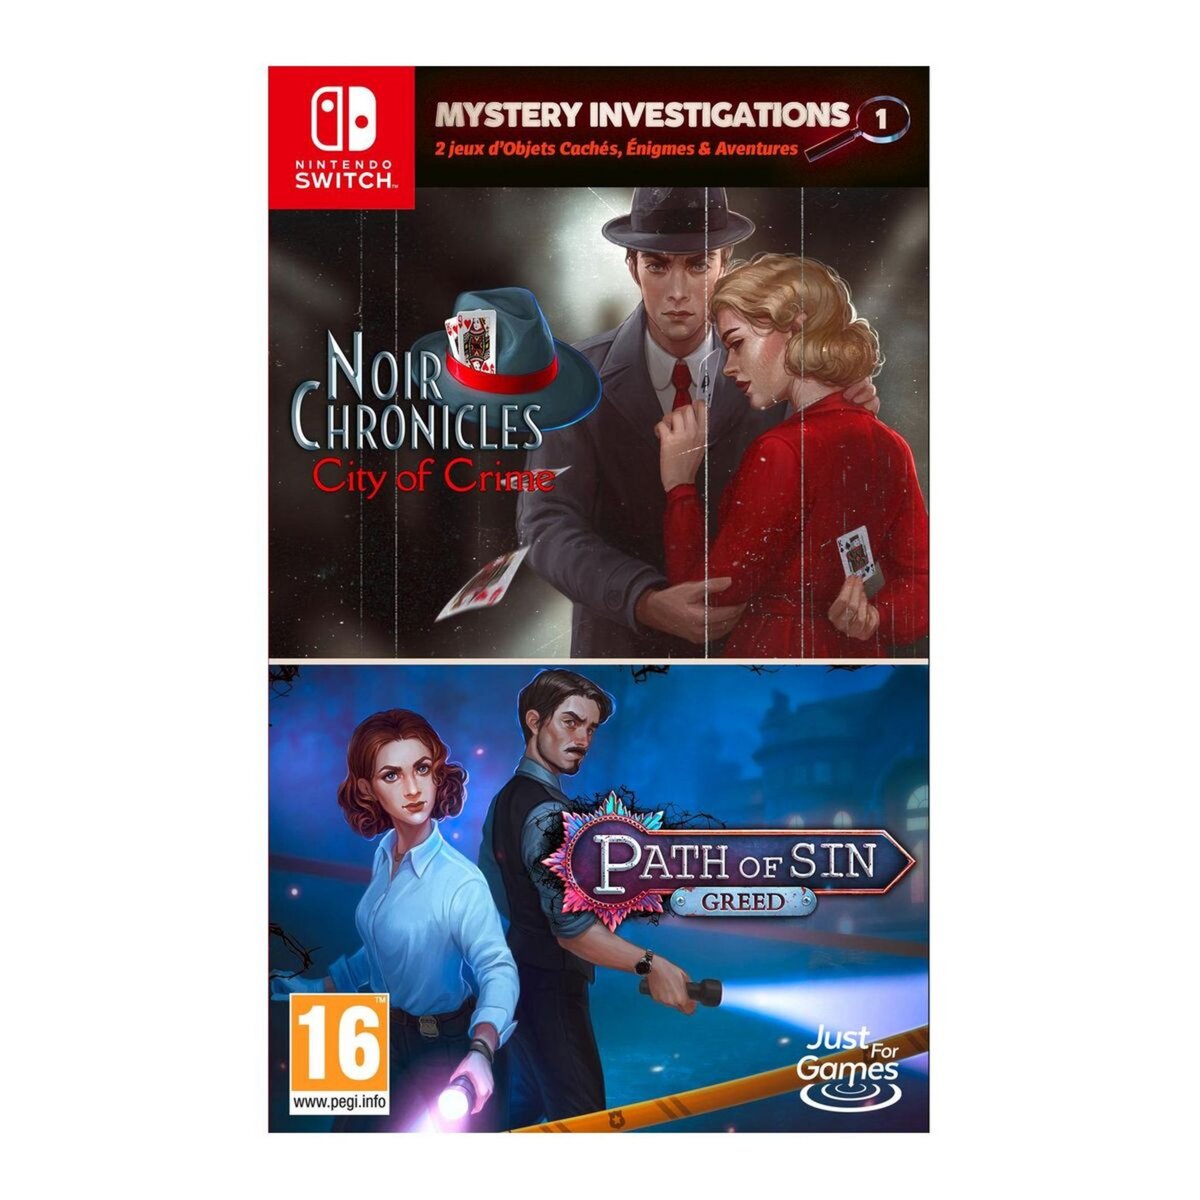 JUST FOR GAMES Mystery investigations 1 Nintendo Switch